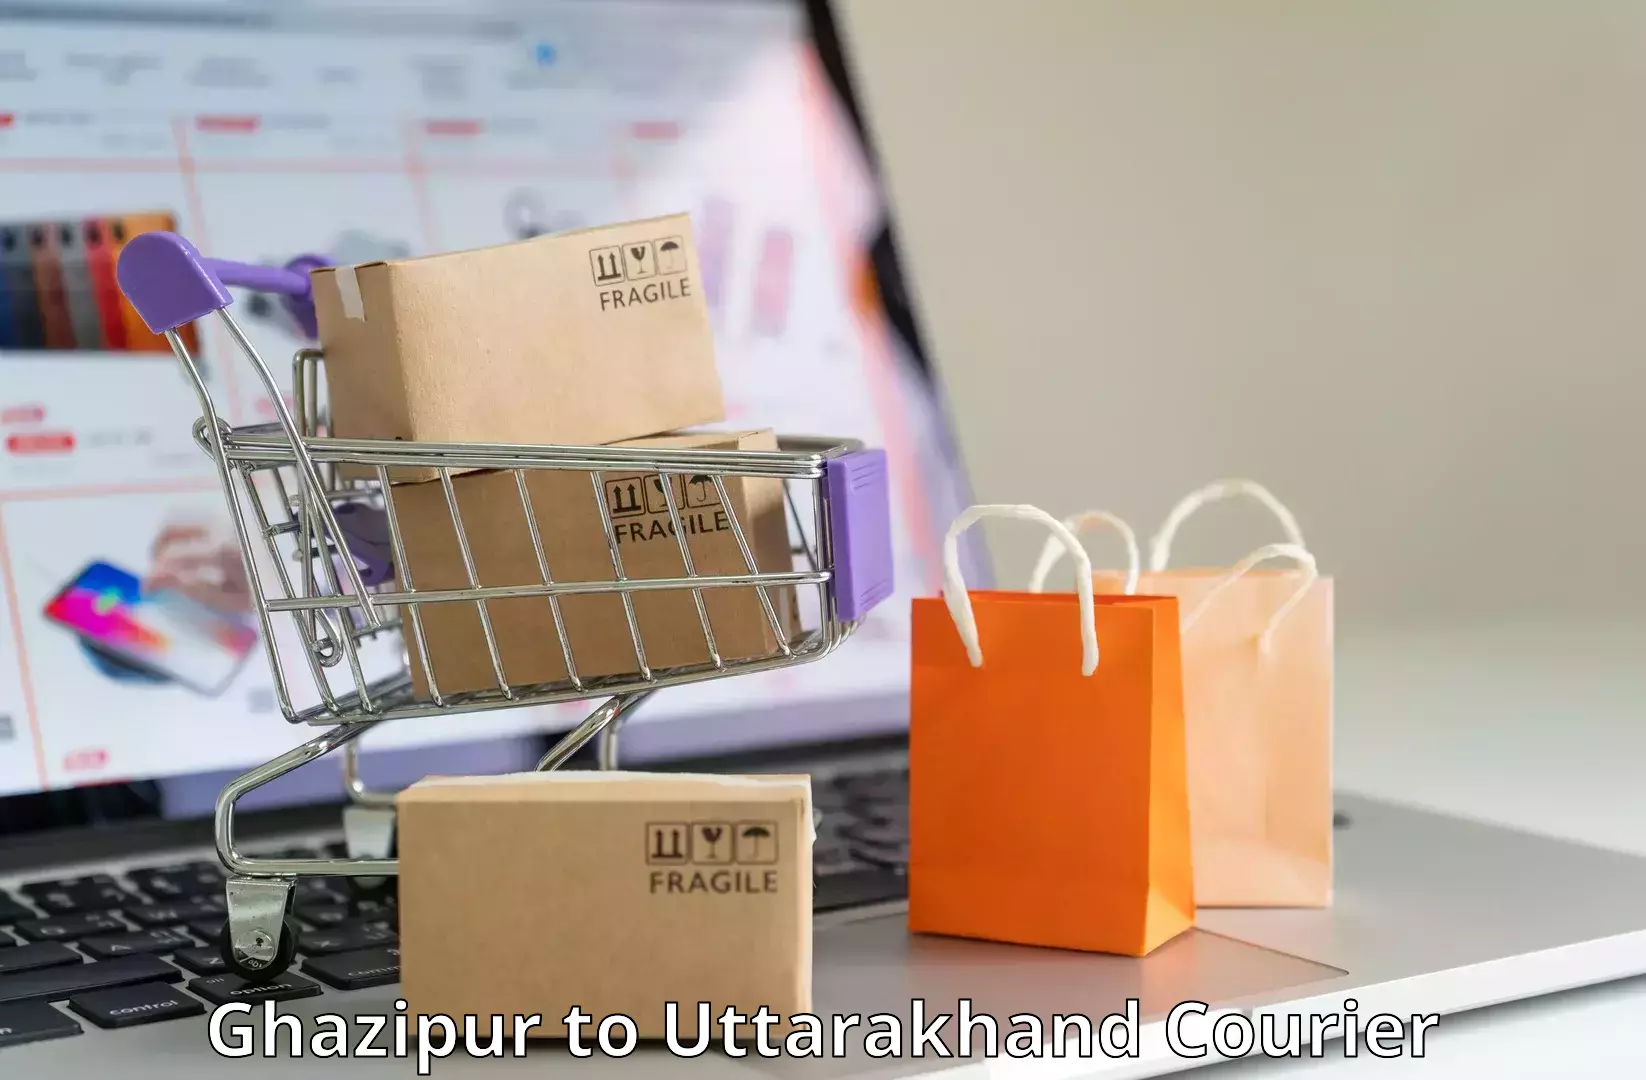 Express mail service in Ghazipur to Uttarakhand